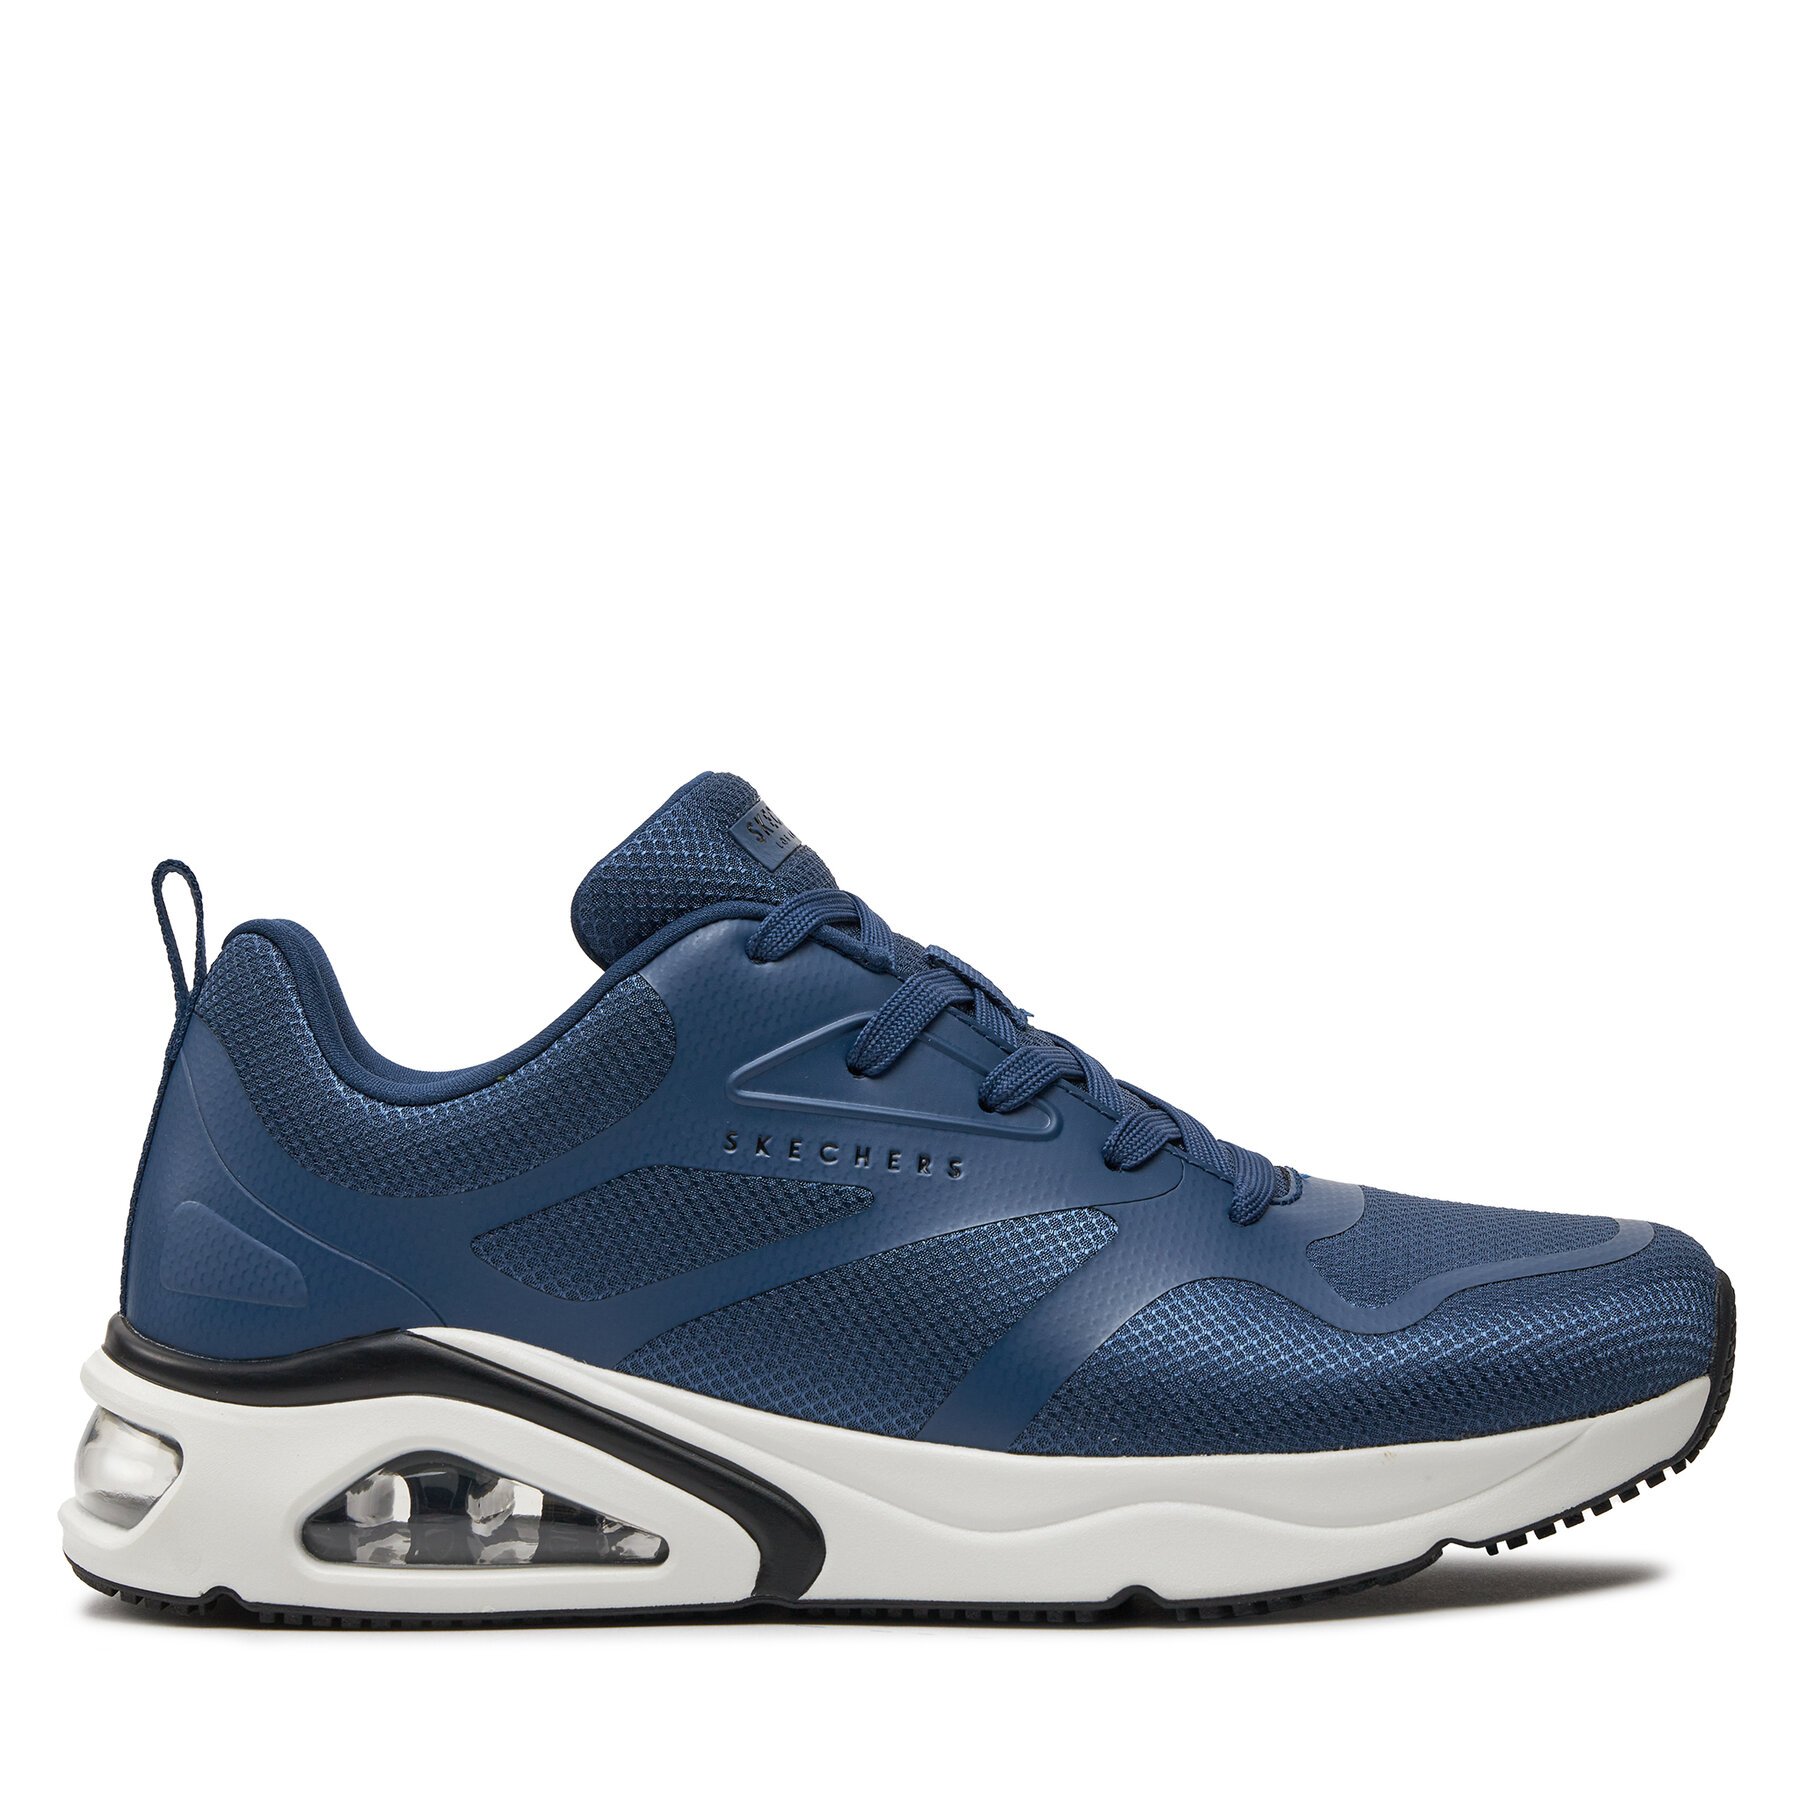 Sneakers Skechers Tres-Air Uno-Revolution-Airy 183070/NVY Bleu marine